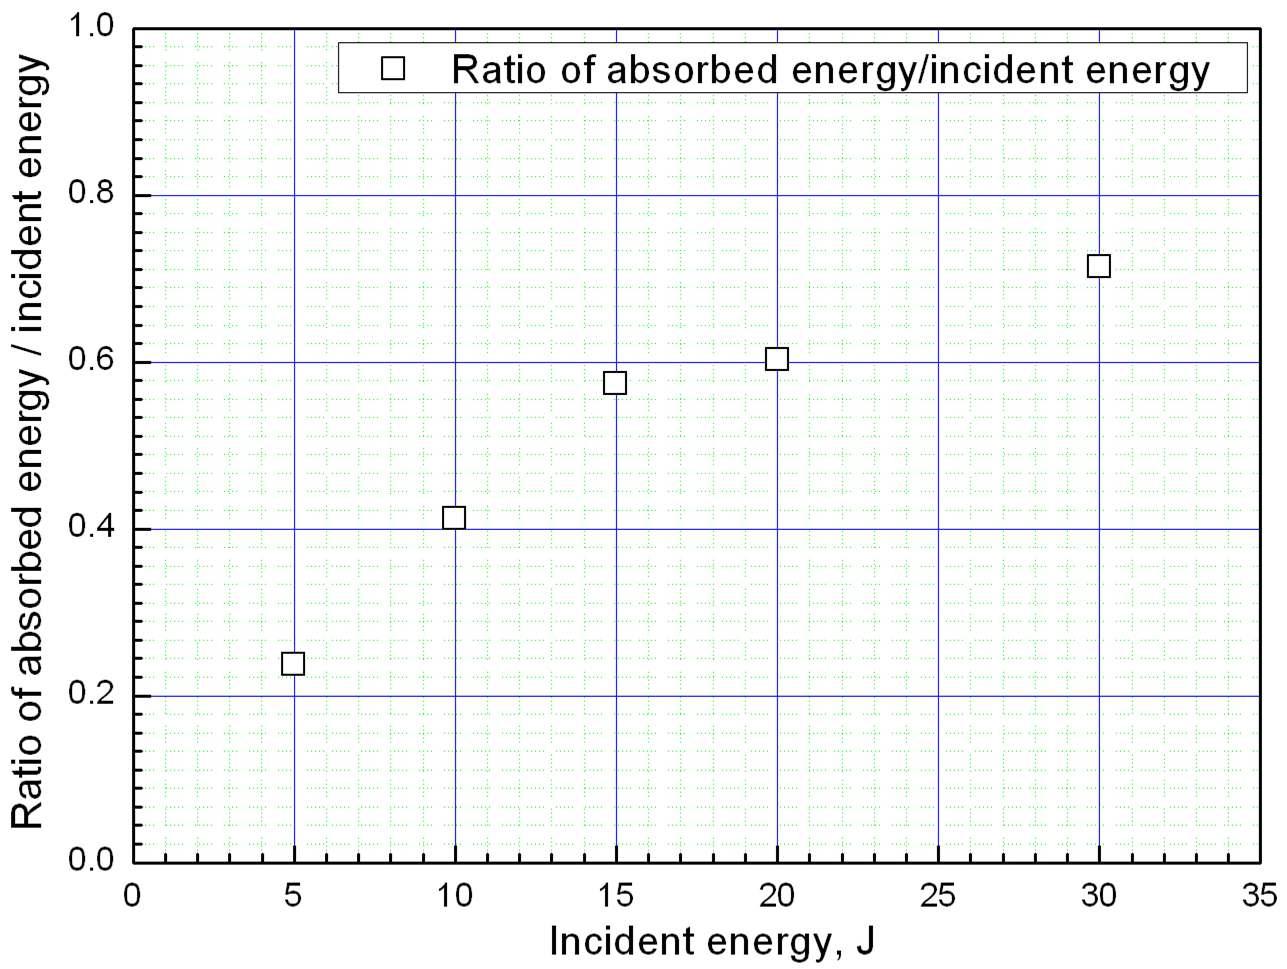 Comparison of incident energy versus absorbed energy